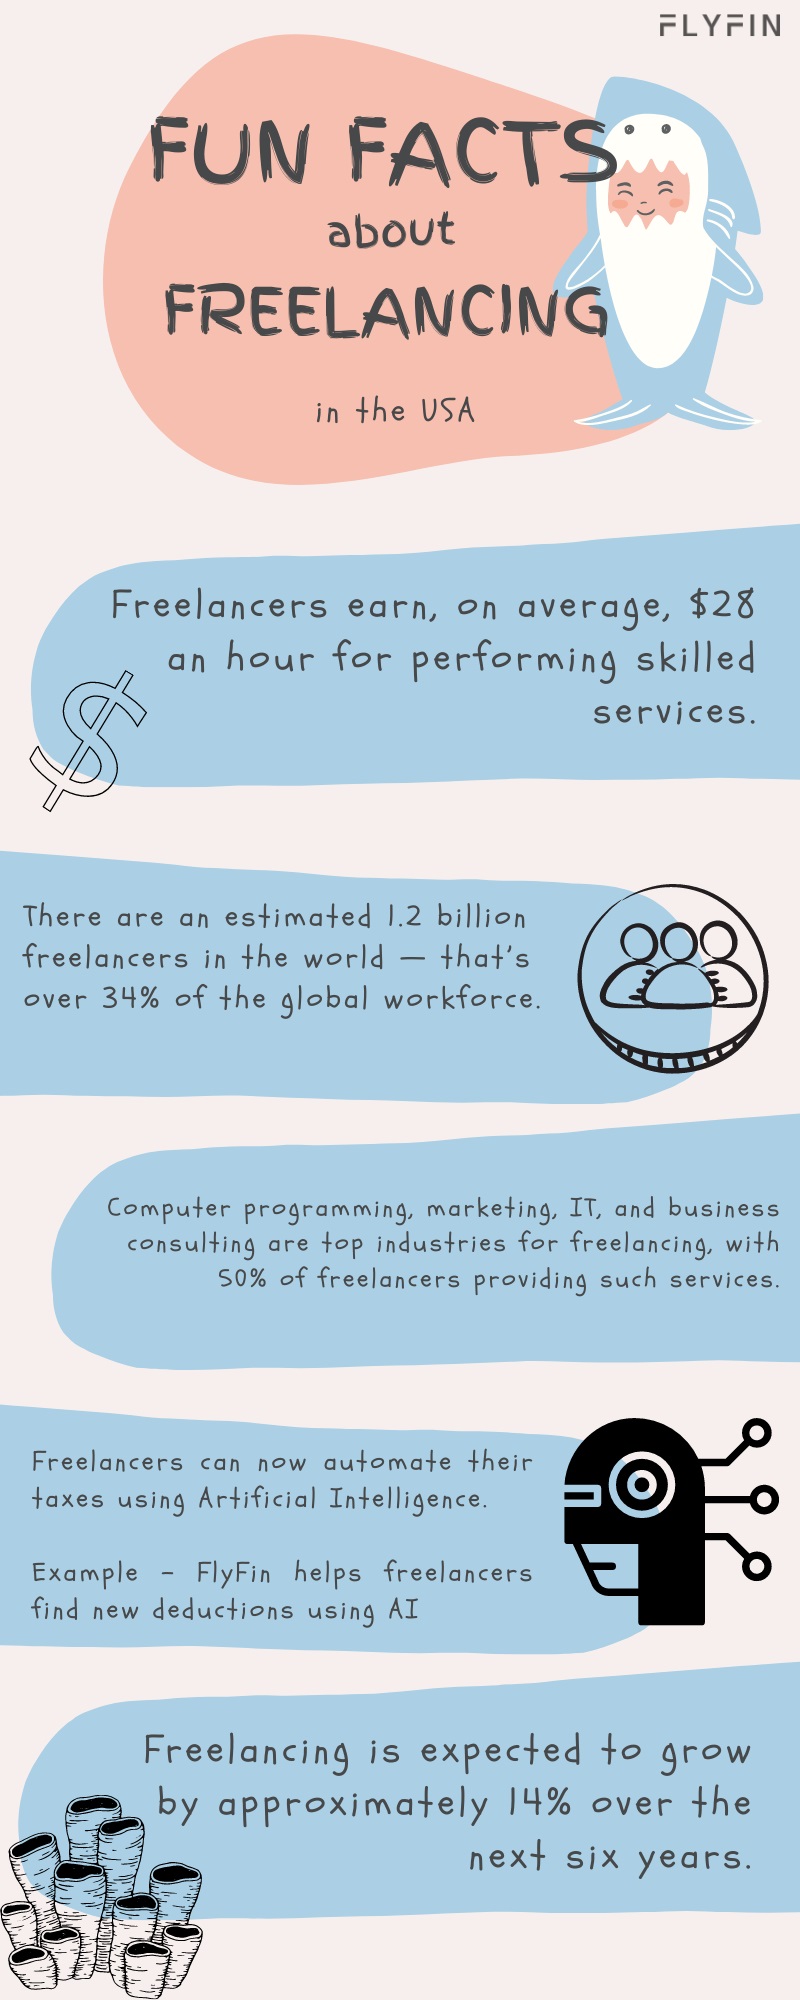 Fun Facts about Freelancing in the USA #Career and Jobs #Freelancing